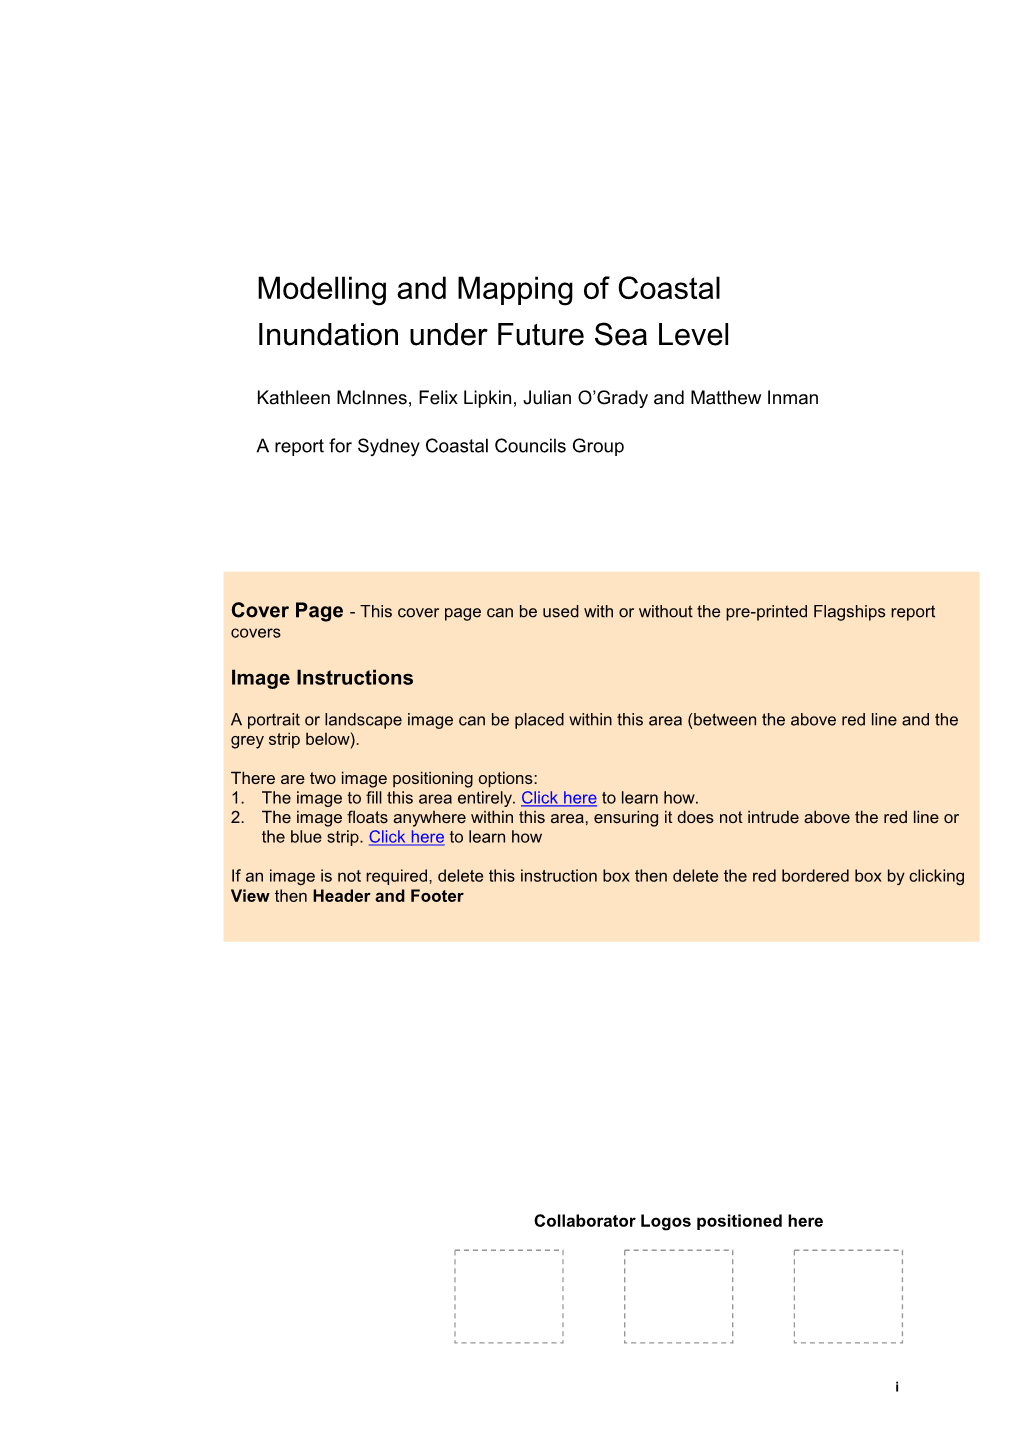 Modelling and Mapping of Coastal Inundation Under Future Sea Level